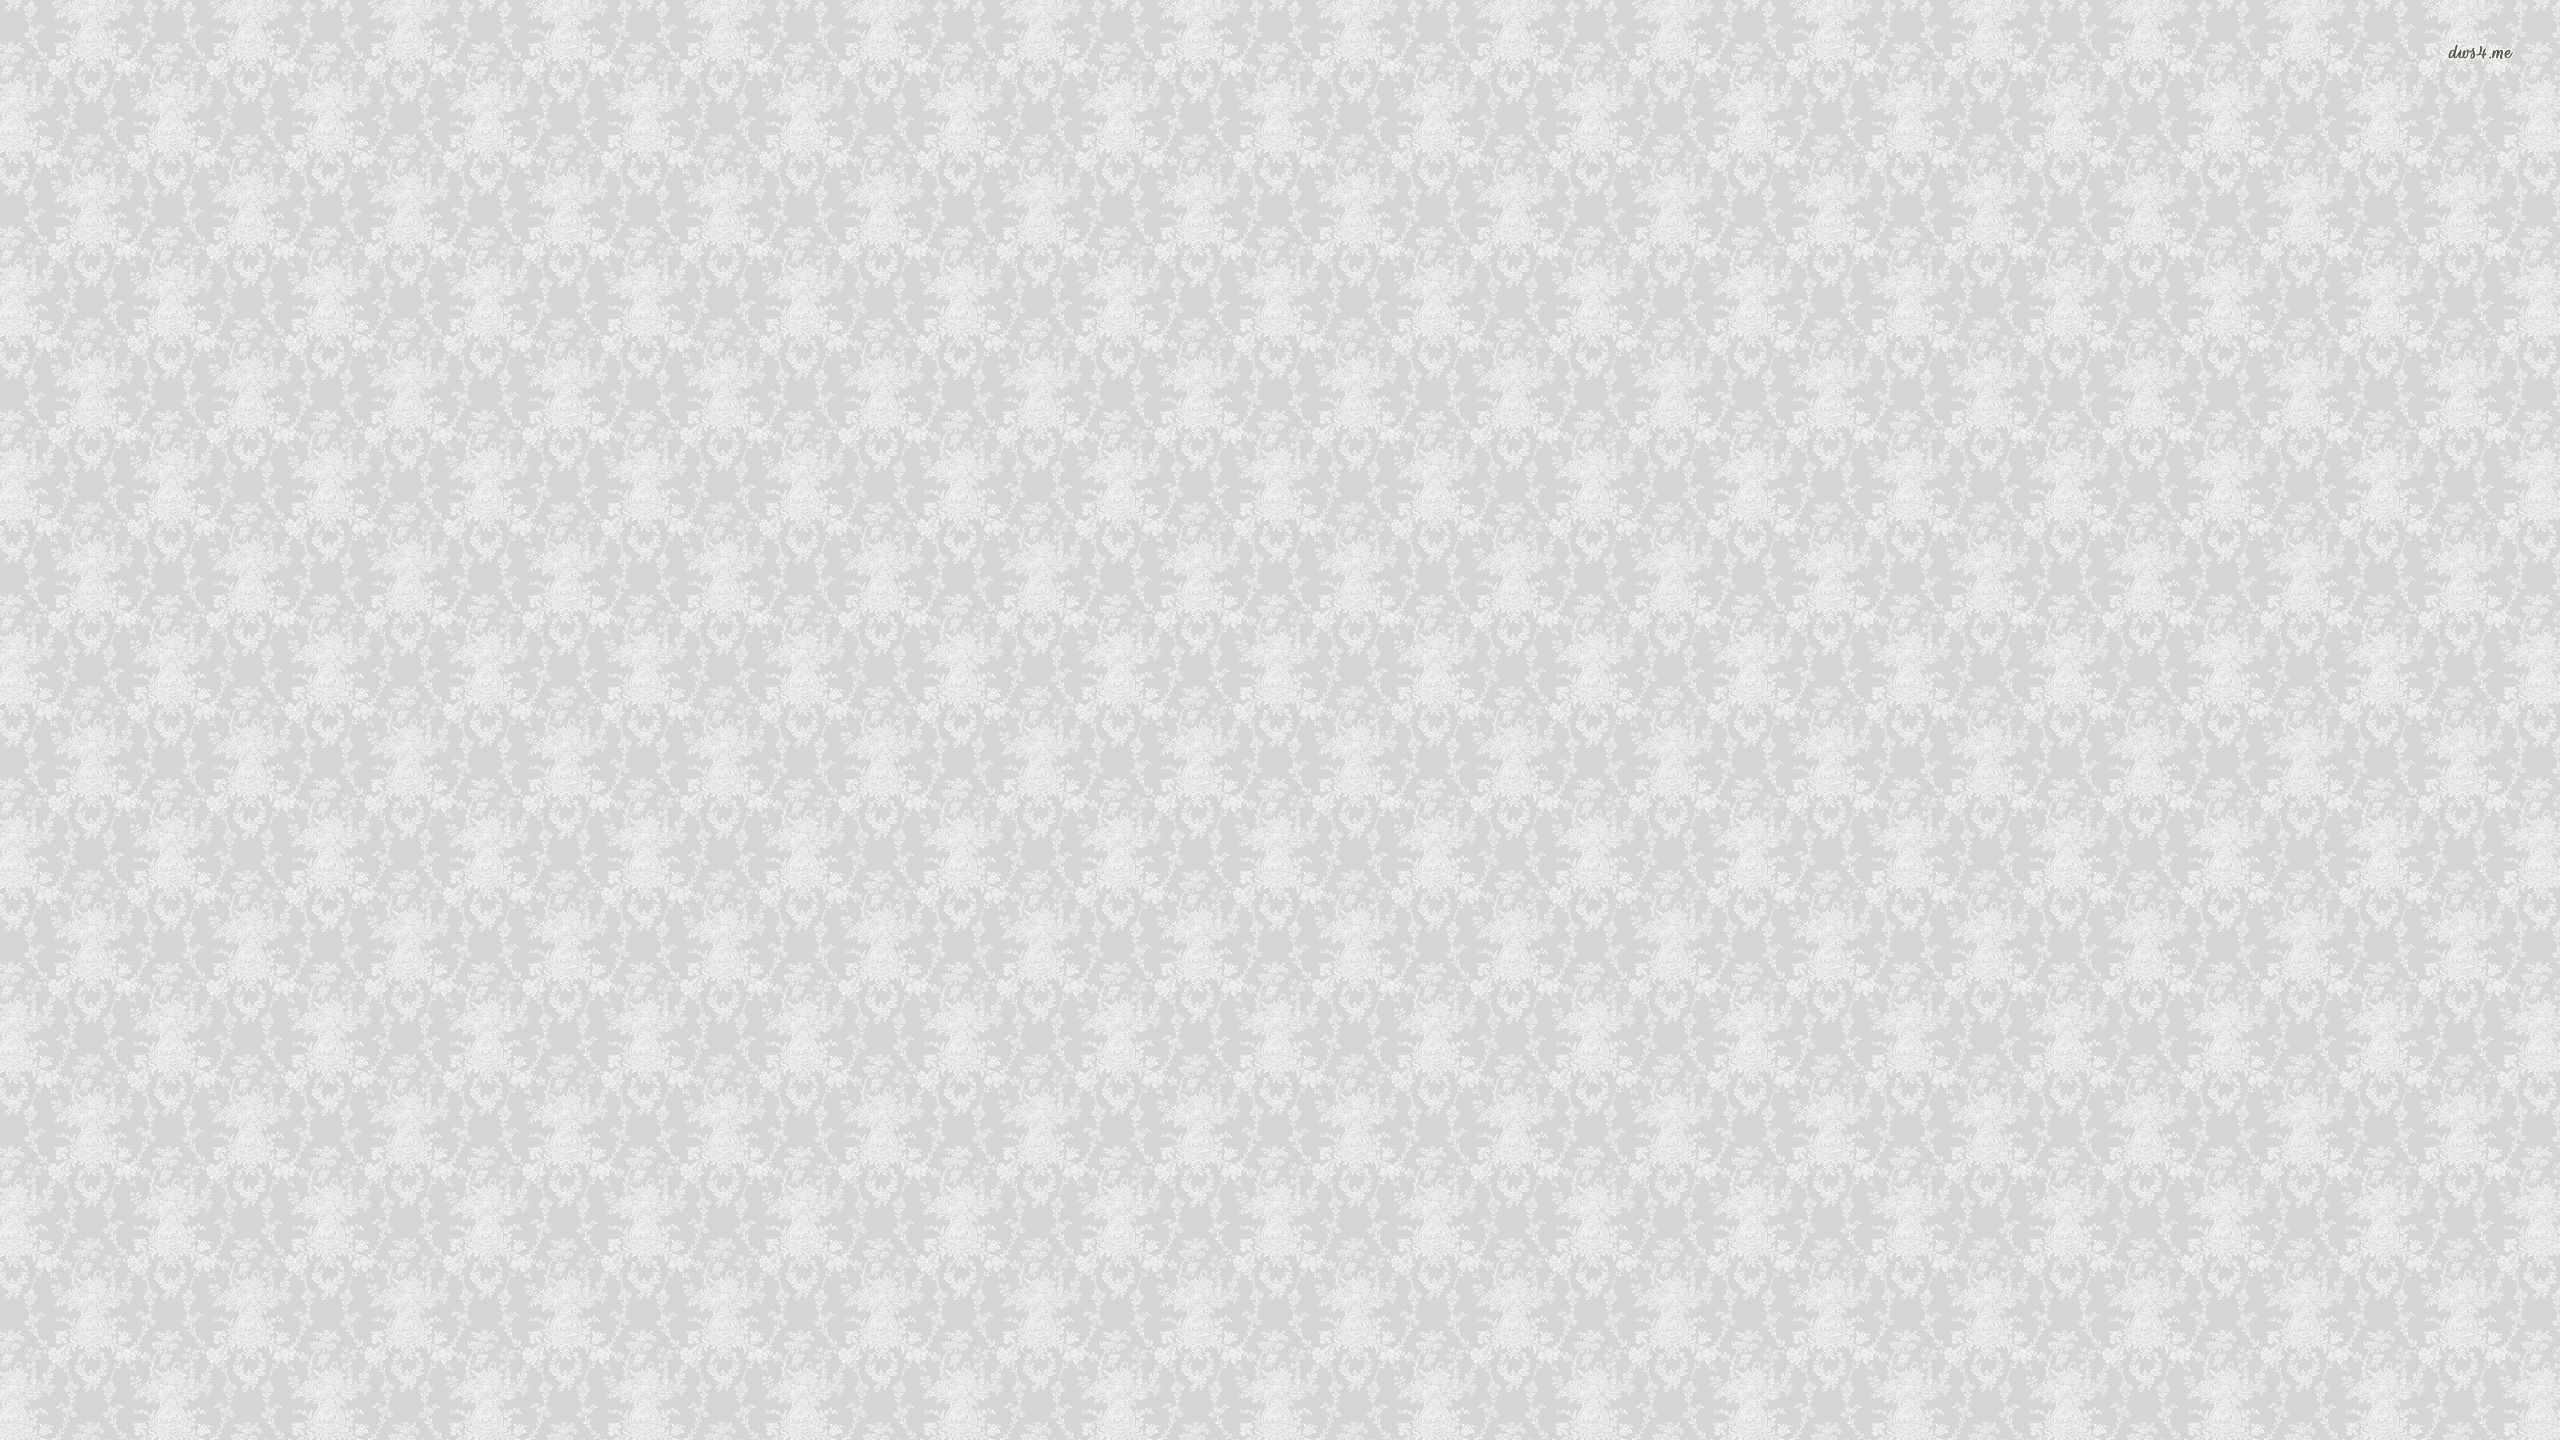 Gray flower pattern wallpaper - Abstract wallpapers - #38885